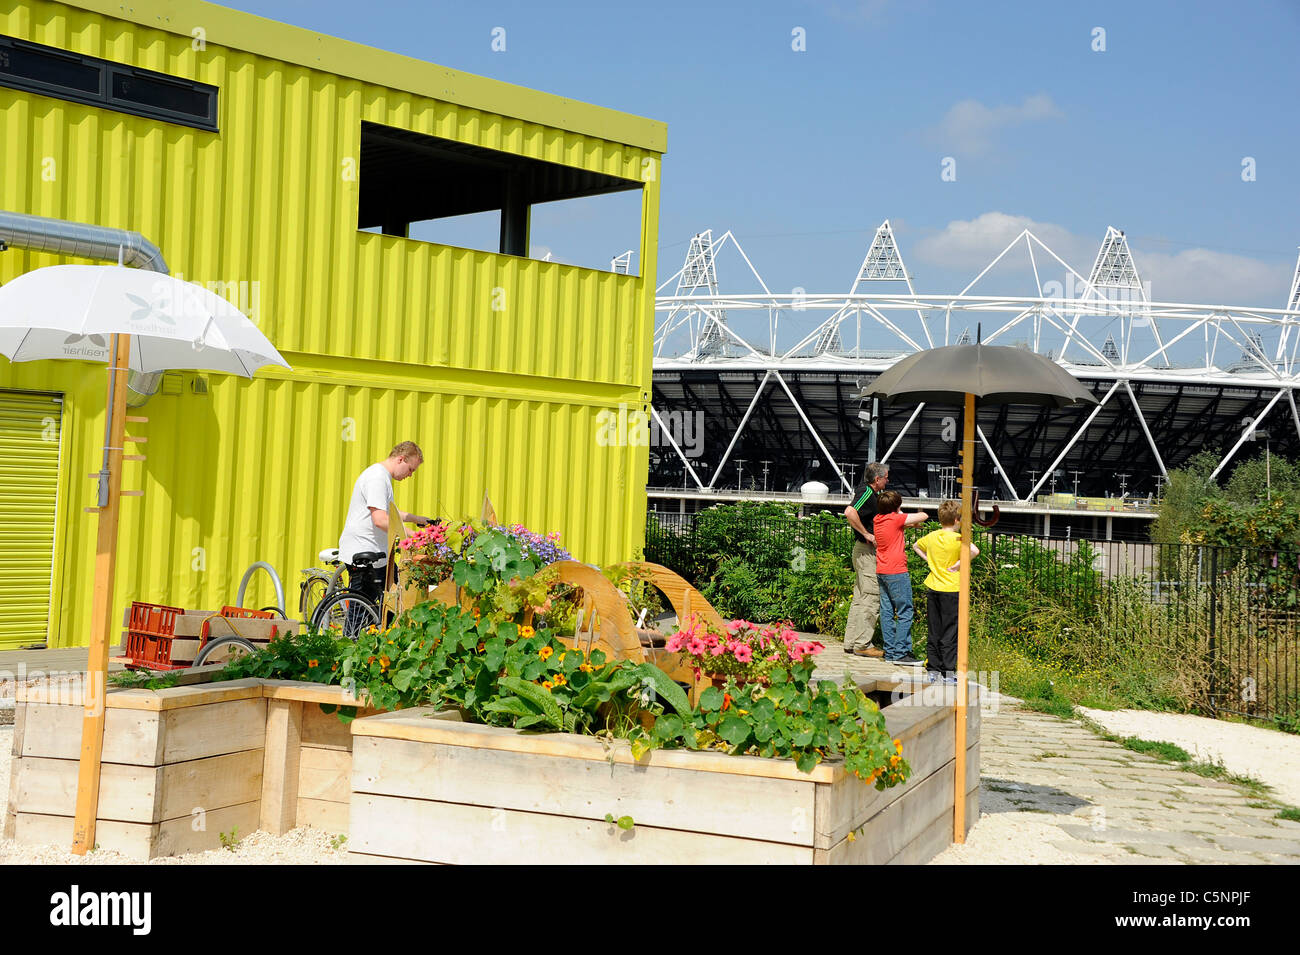 Visitors viewing the 2012 Olympic Site from the Greenway viewing area. Stock Photo